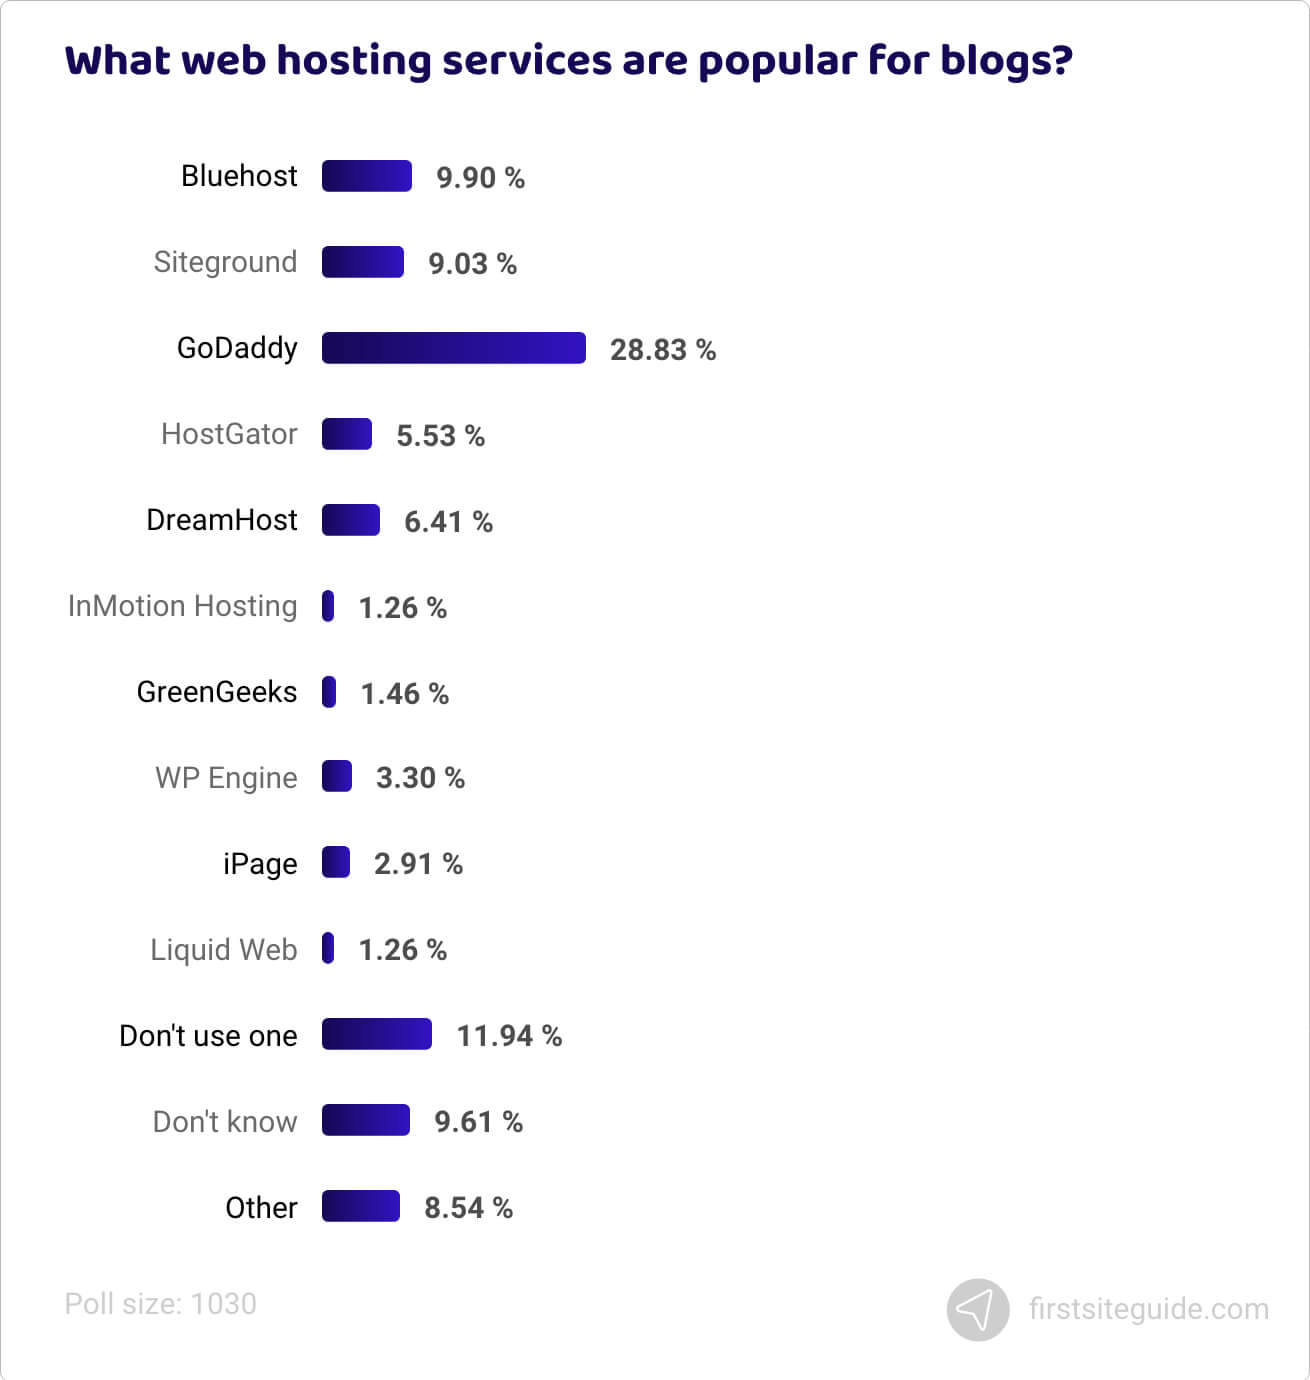 What web hosting services are popular for blogs